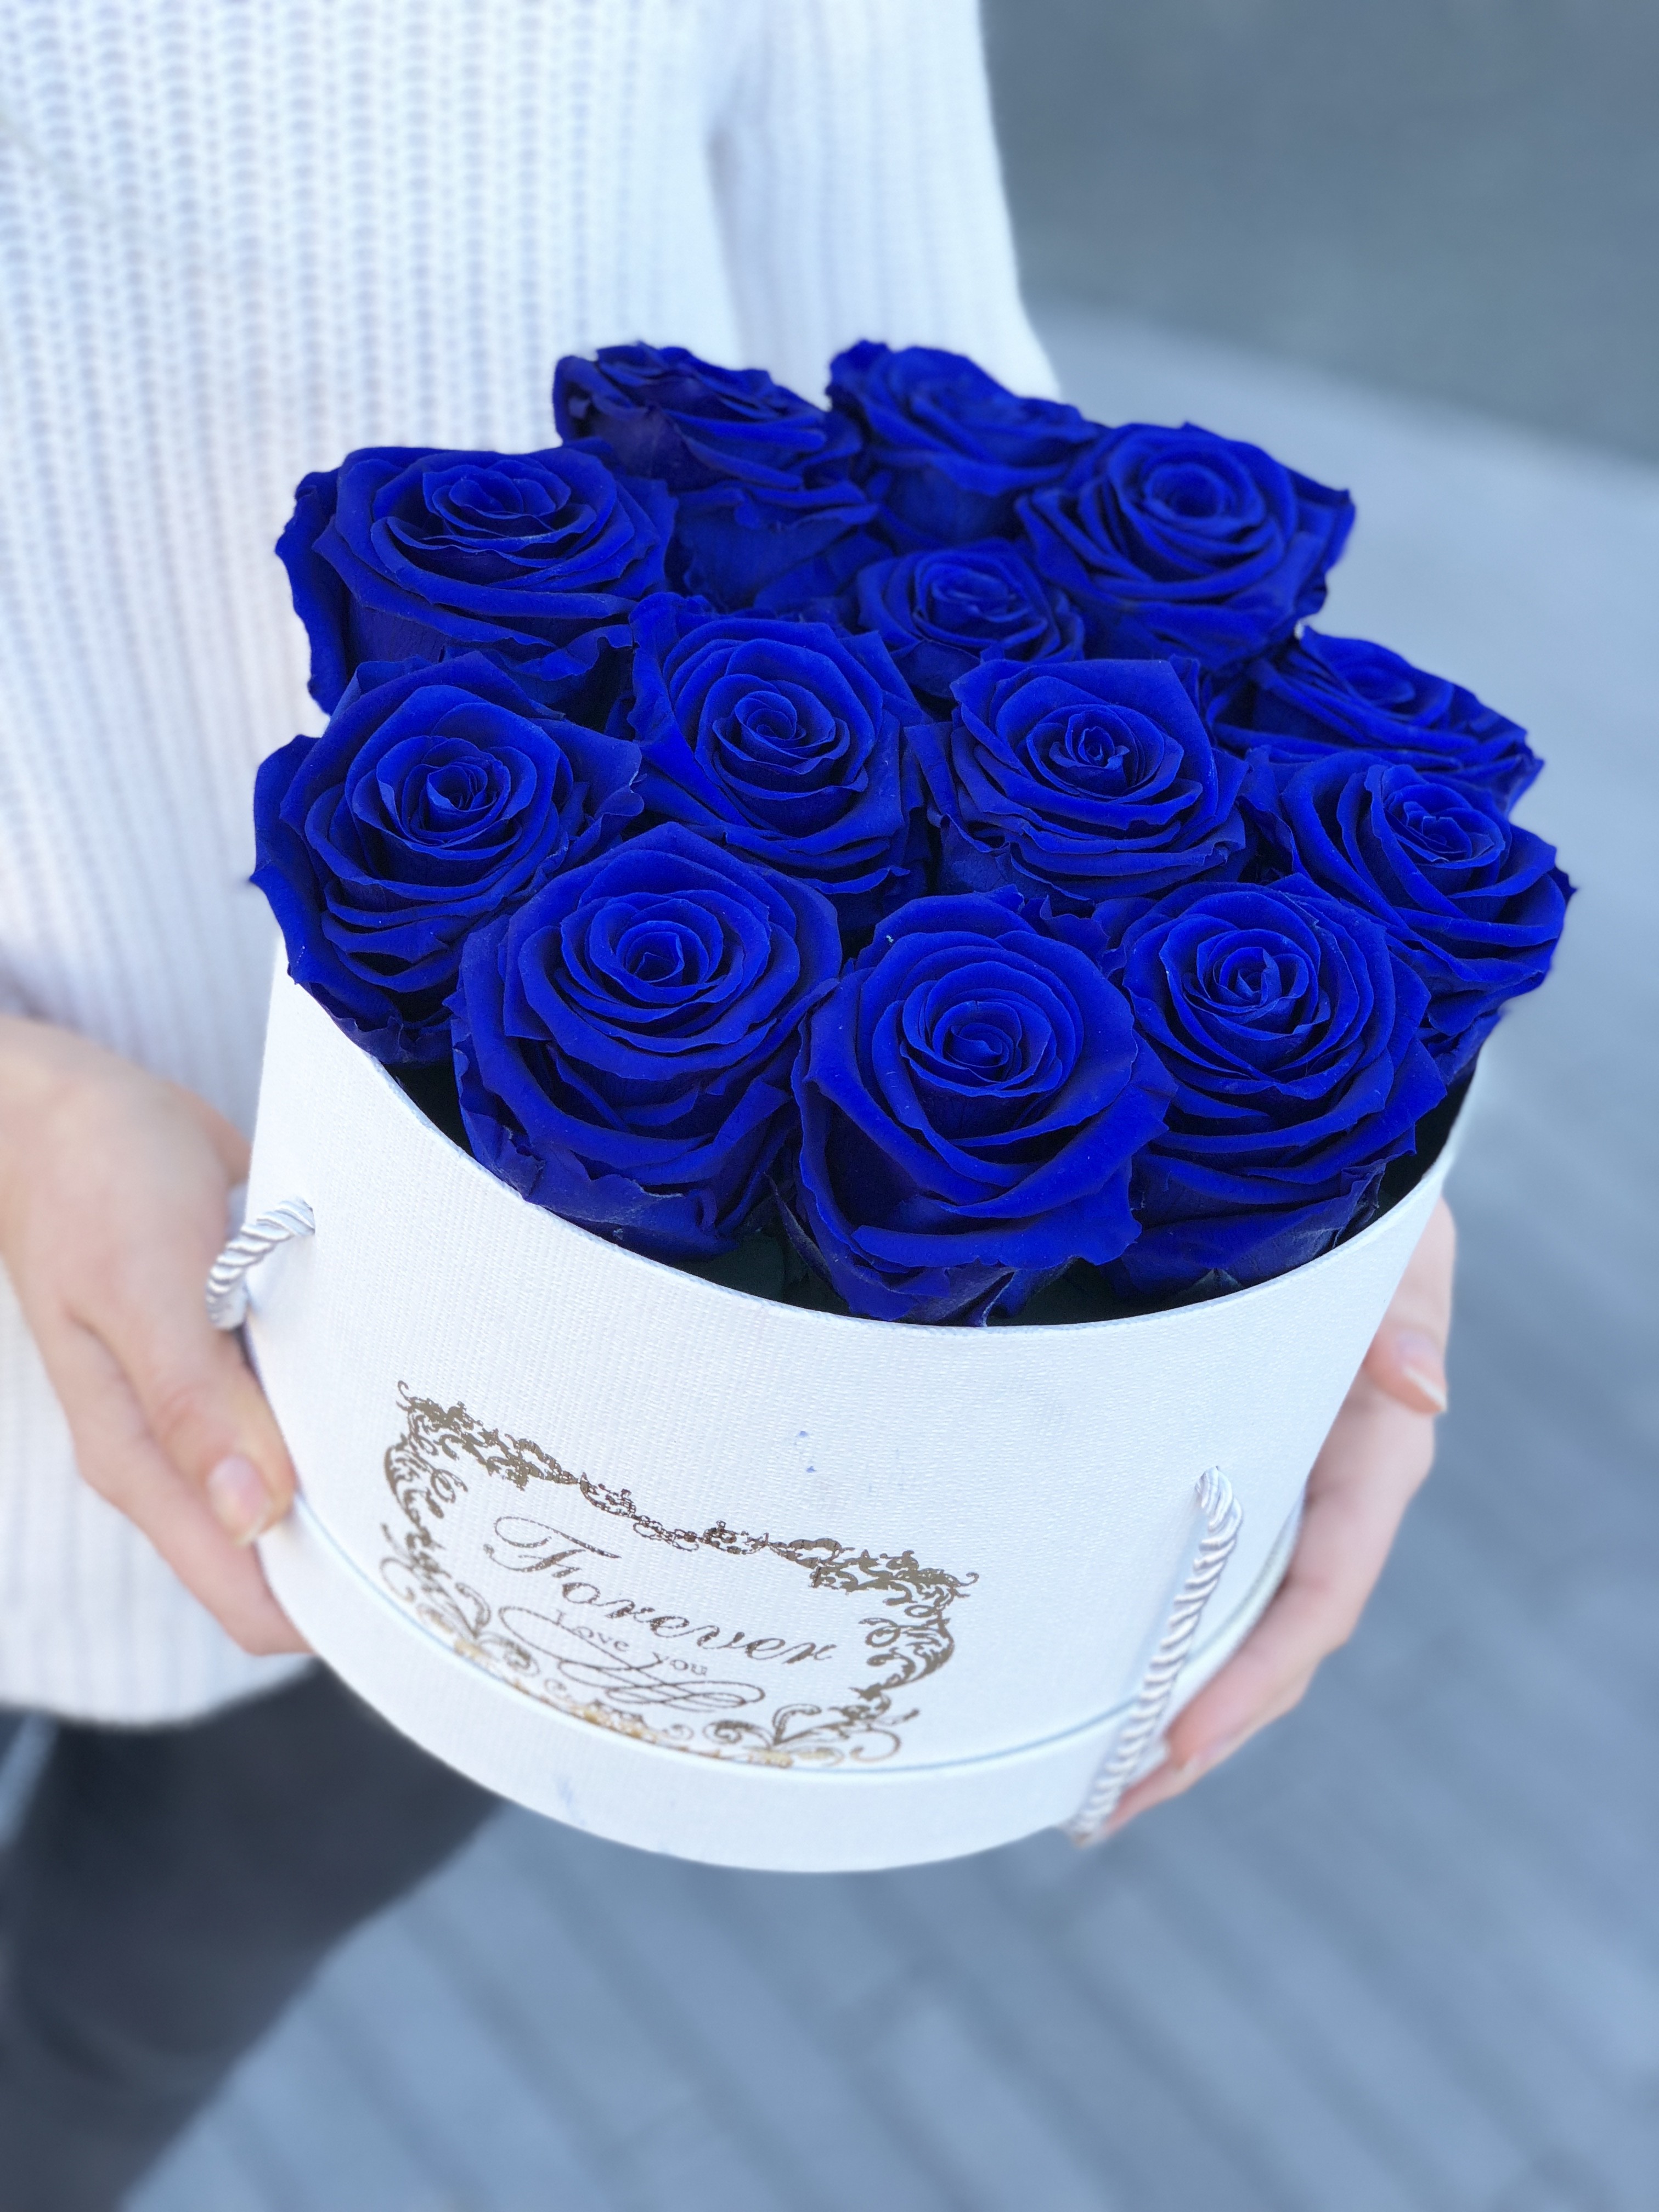 Everlasting Roses - Blue Roses (11-13 Roses) in Torrance, CA | Andes ...